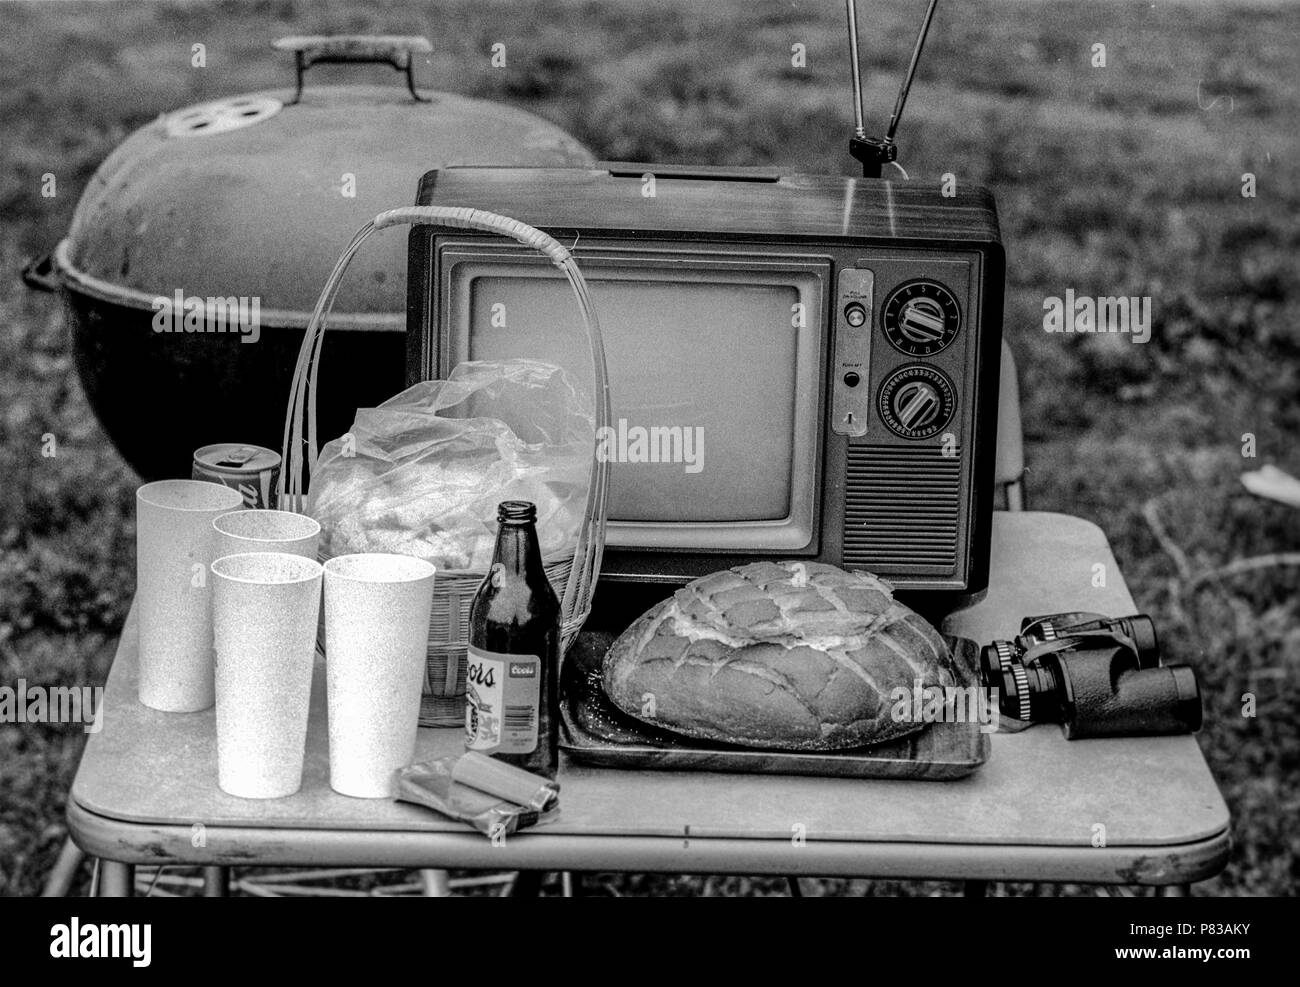 Stanford, California, USA. 20th Jan, 1985. Party supplies at the Super Bowl XIX tailgate on the Stanford University campus. The San Francisco 49ers defeated the Miami Dolphins 38-16 on Sunday, January 20, 1985. Credit: Al Golub/ZUMA Wire/Alamy Live News Stock Photo